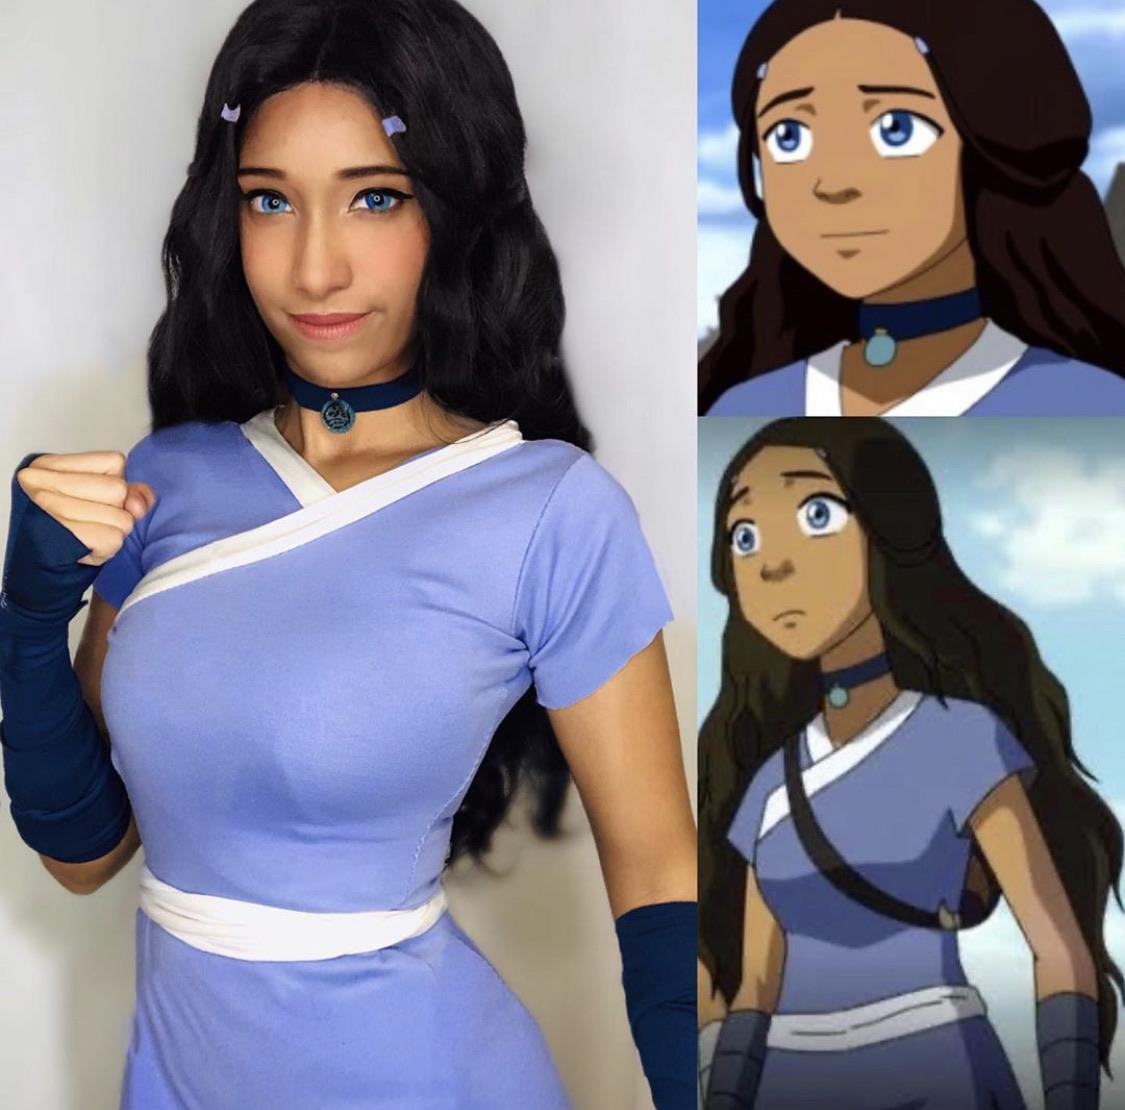 Katara From Avatar The Last Airbender By Leiracospla